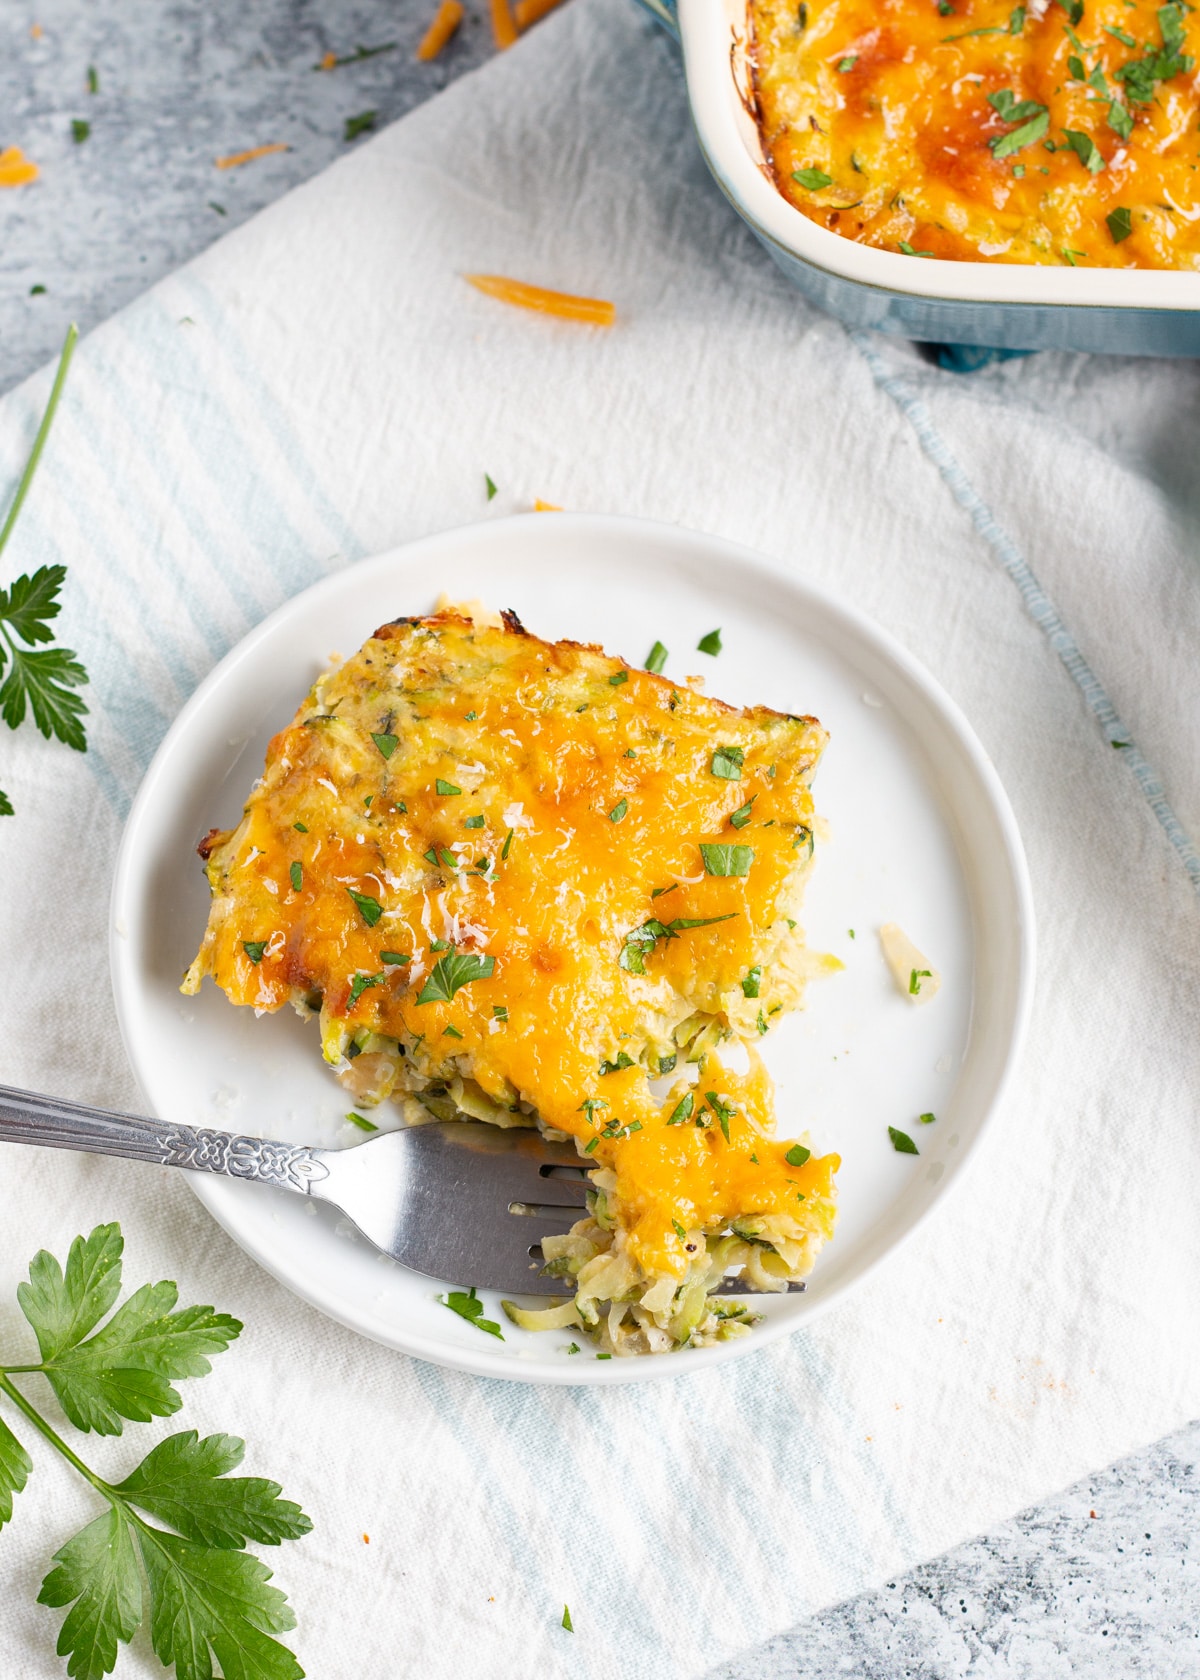 Image of a slice of the cheesy zucchini casserole in plate with a fork.